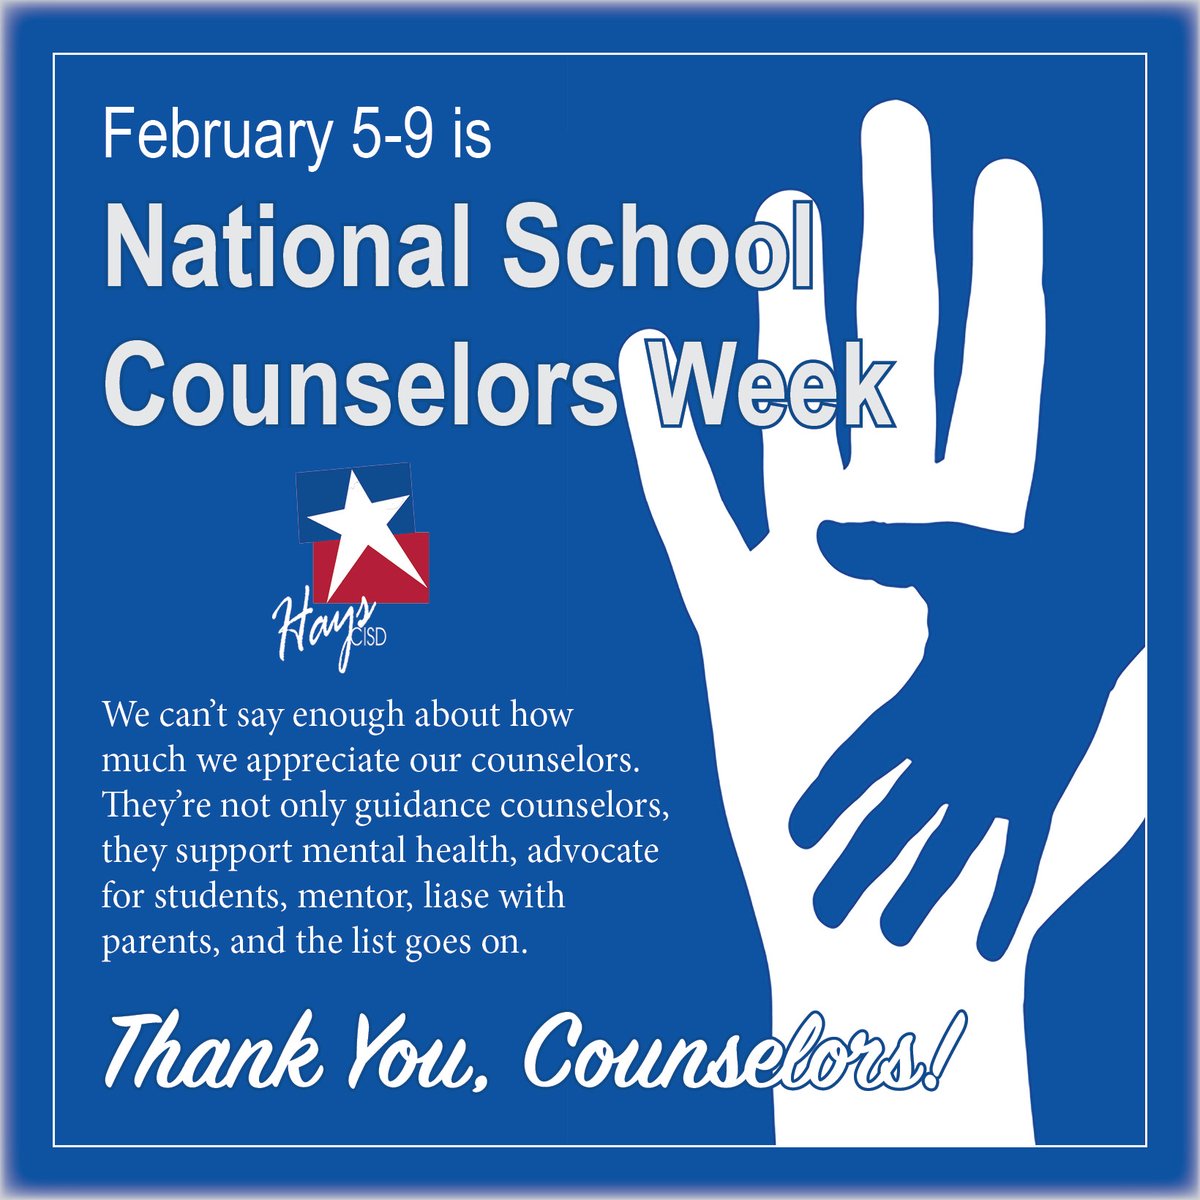 February 5-9 is National School Counselors Week. We can’t say enough about how much we appreciate our counselors. They’re not only guidance counselors, they support mental health, advocate for students, mentor, liase with parents, and the list goes on. Thank you, counselors!